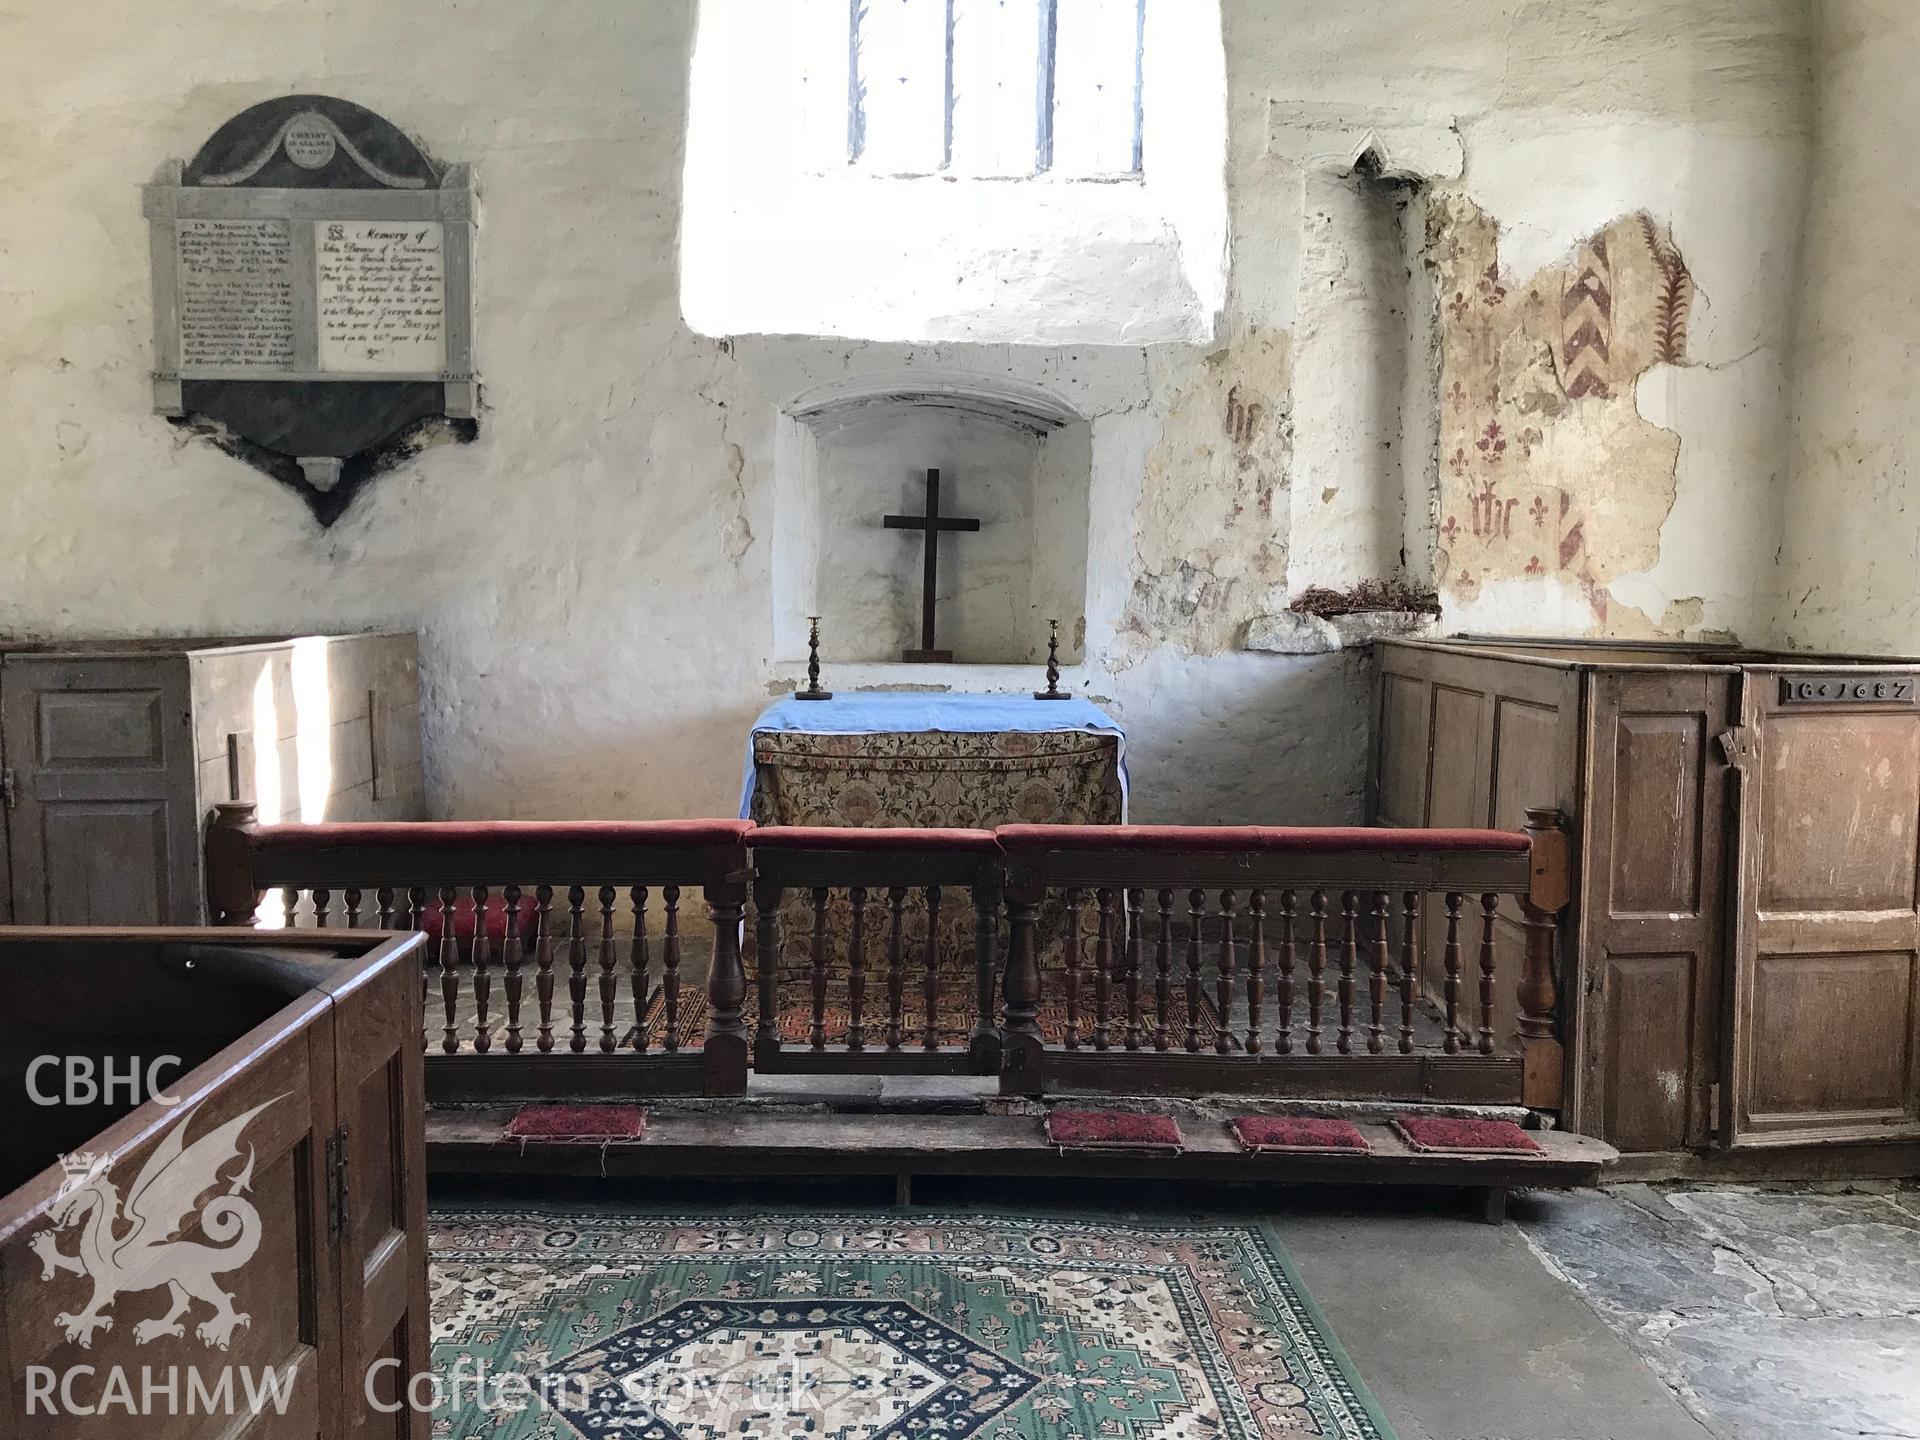 Colour photo showing interior view of St. Cewydd's Church, Diserth, taken by Paul R. Davis, 19th May 2018.